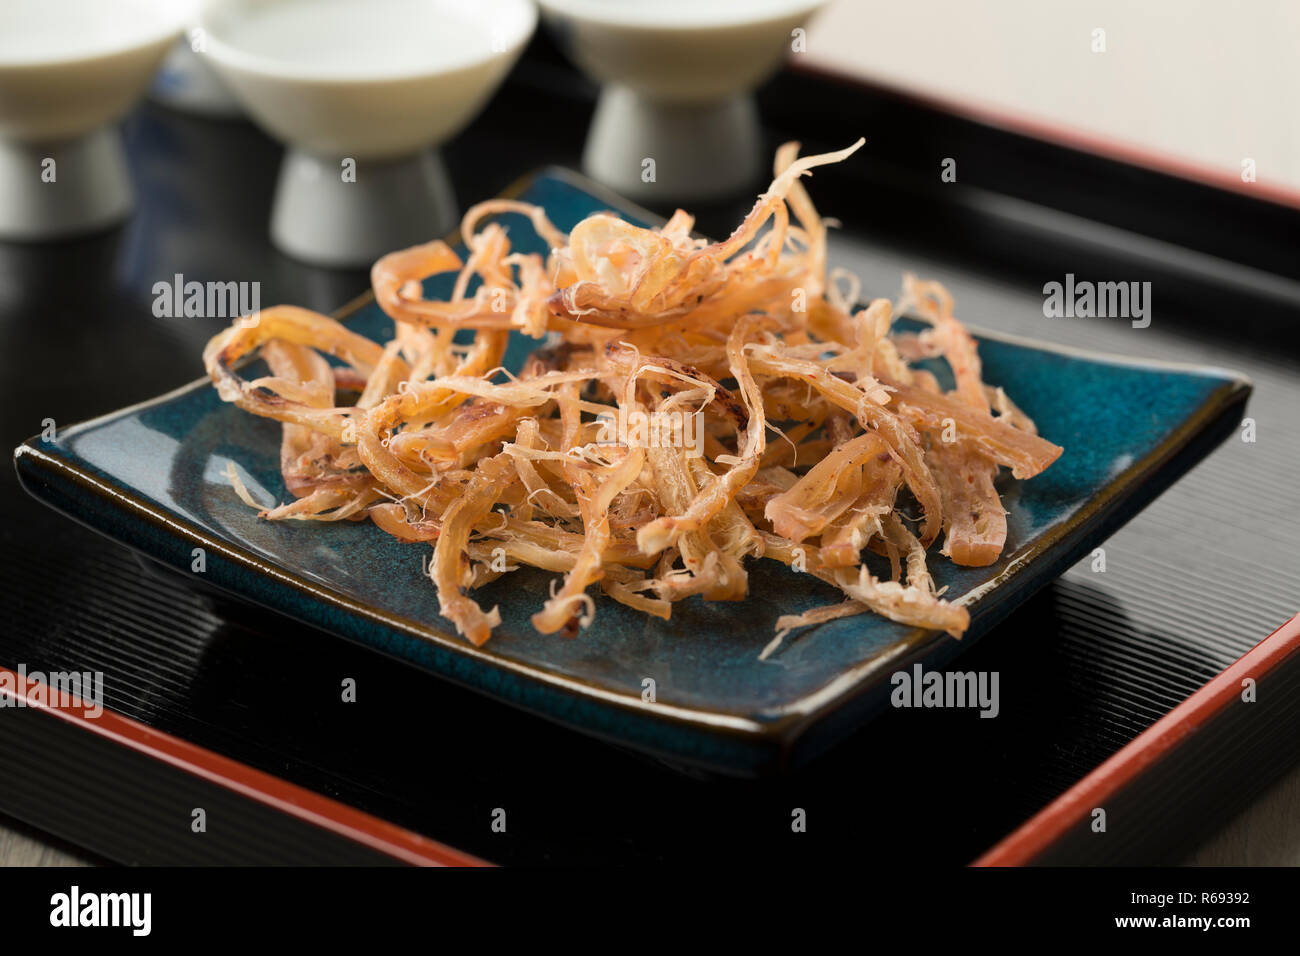 Dish with traditional dried shredded seasoned squid Stock Photo